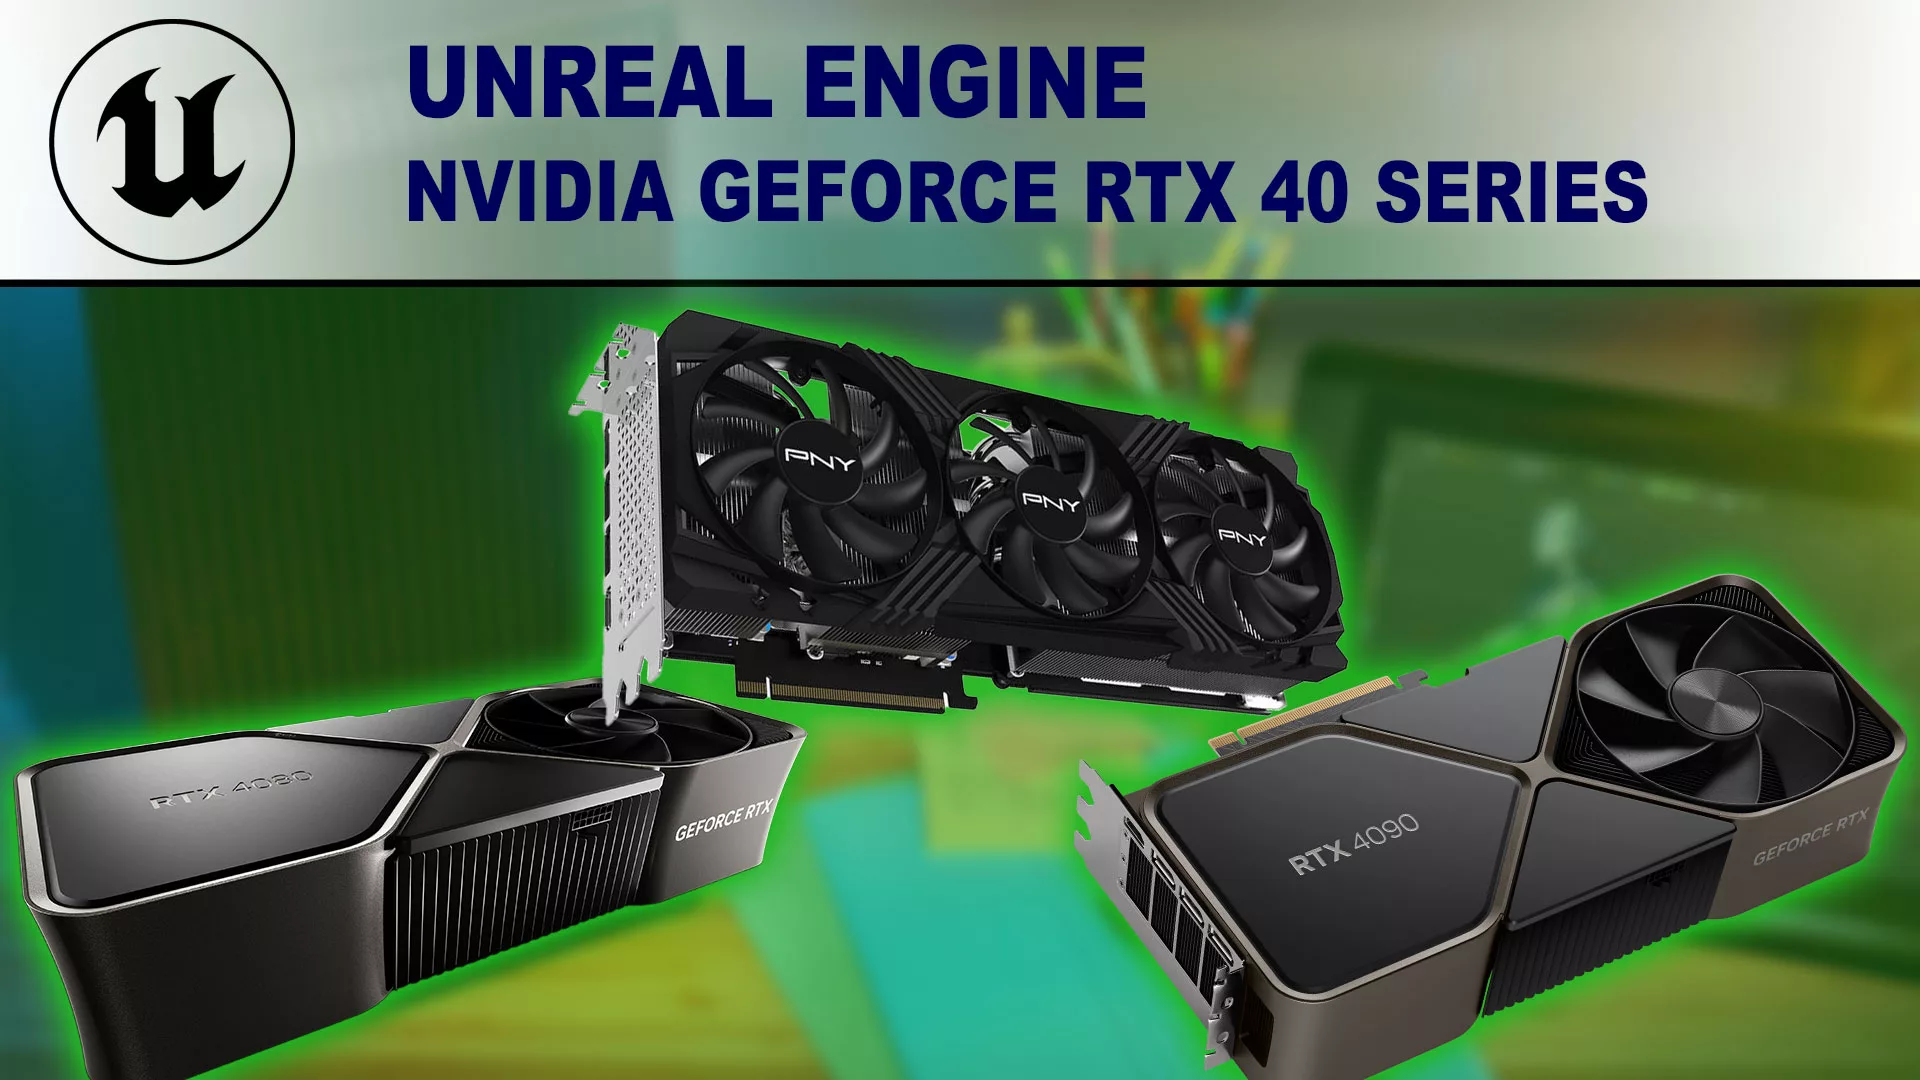 The best power supplies for your GeForce RTX 40 SUPER graphics card